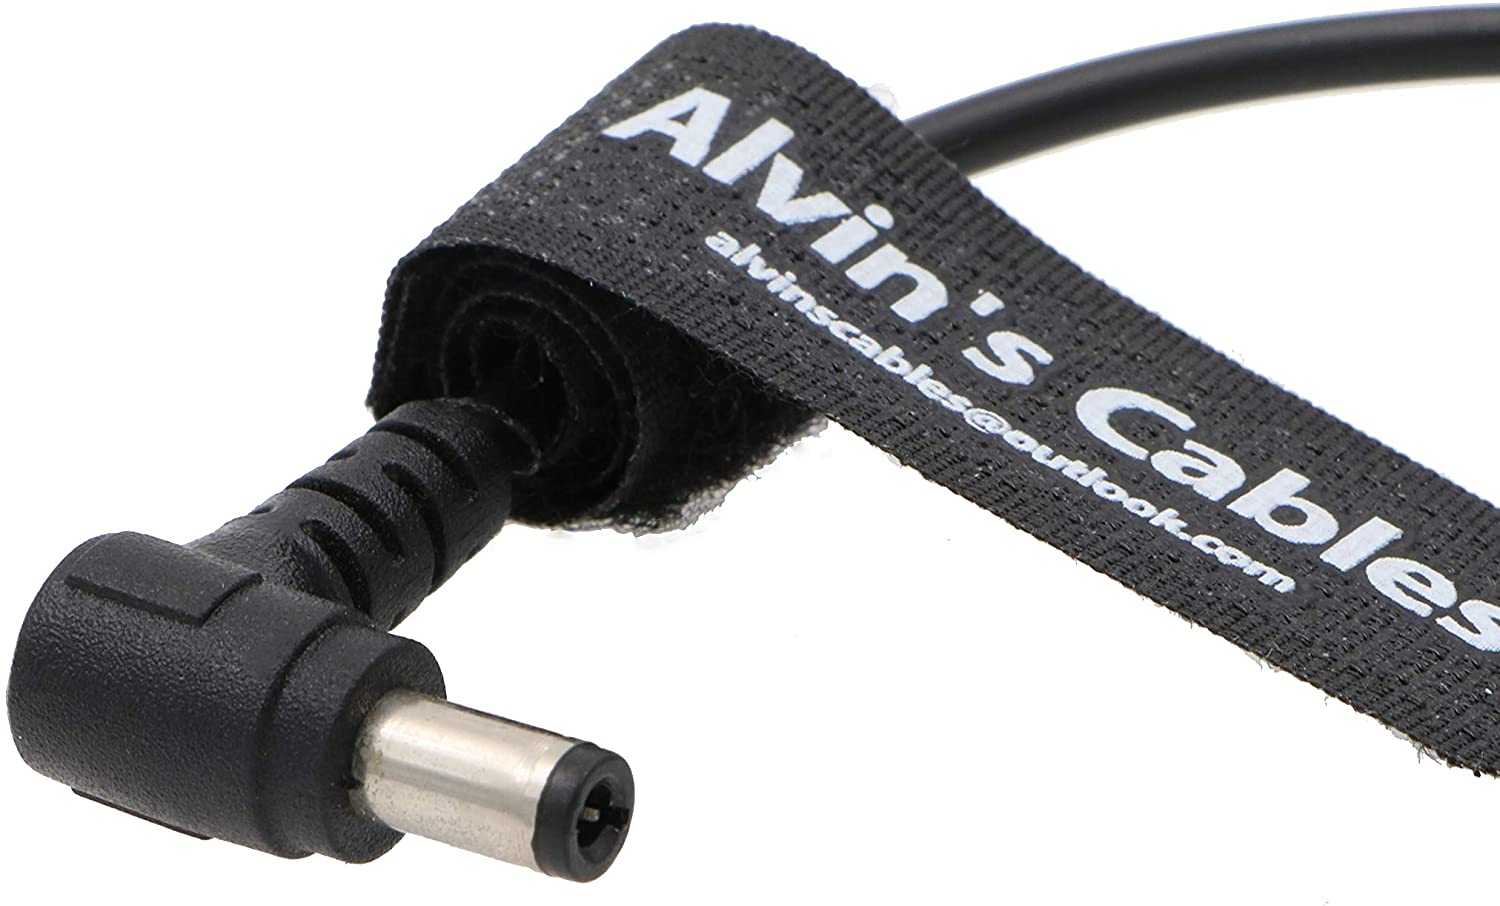 Alvin's Cables Portkeys BM5 BM7 Monitor Power Cable 4 Pin Female to Right Angle DC Power Cord